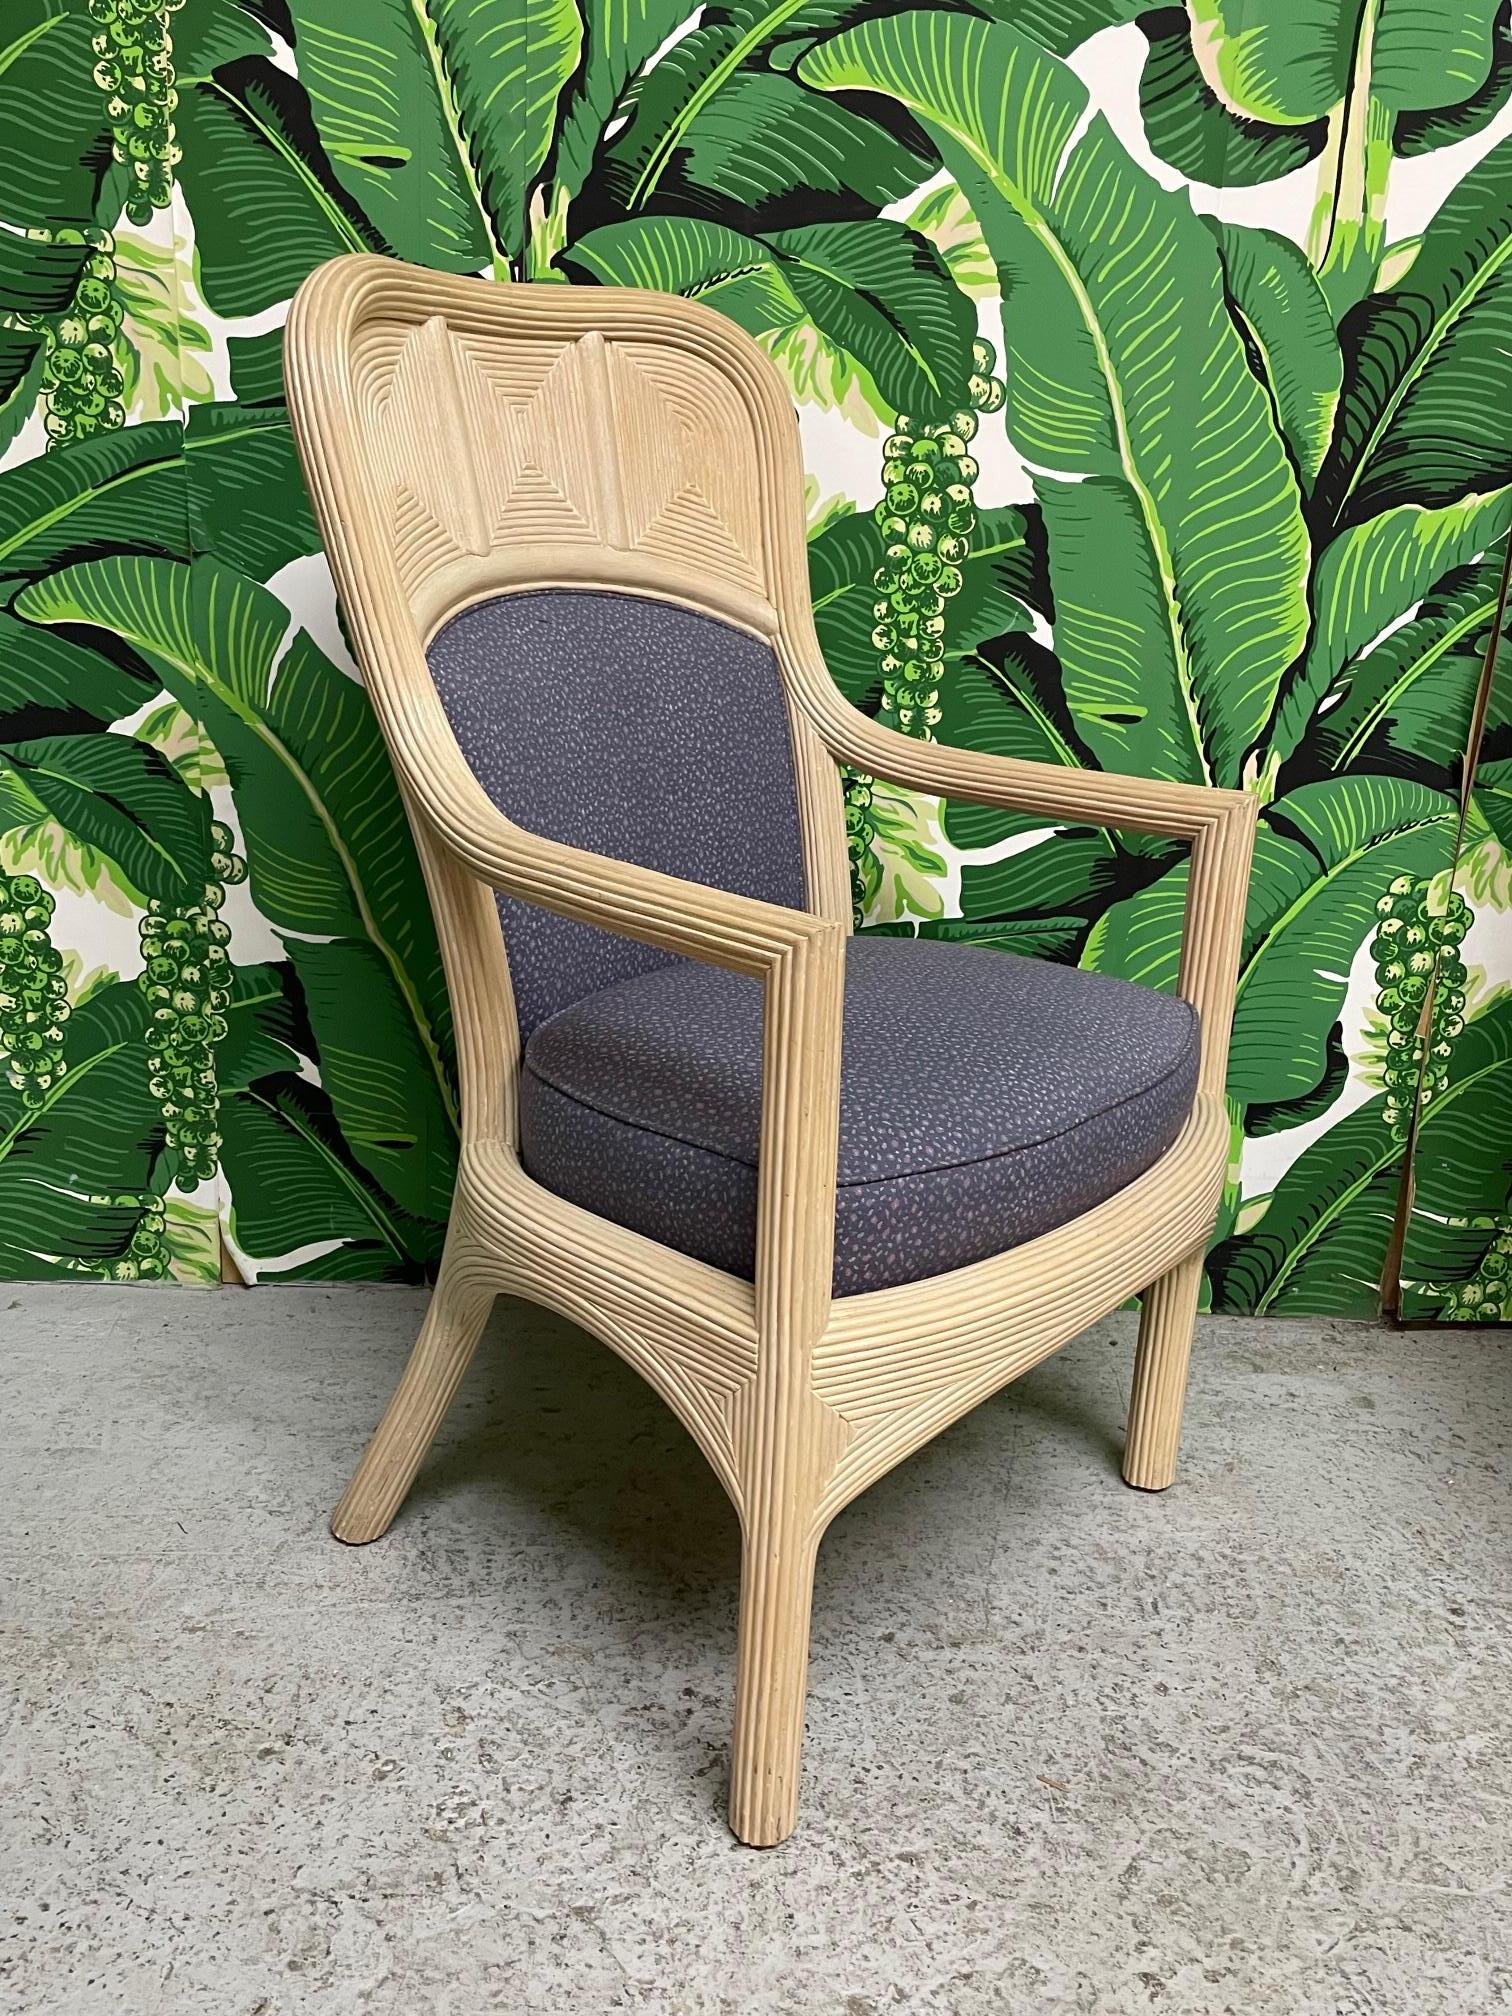 Set of six dining chairs feature full veneer of pencil reed rattan in a unique geometric design. Comfortable back and seat cushions. Upholstered in a purple floral pattern. Very good condition with only minor imperfections consistent with age (see